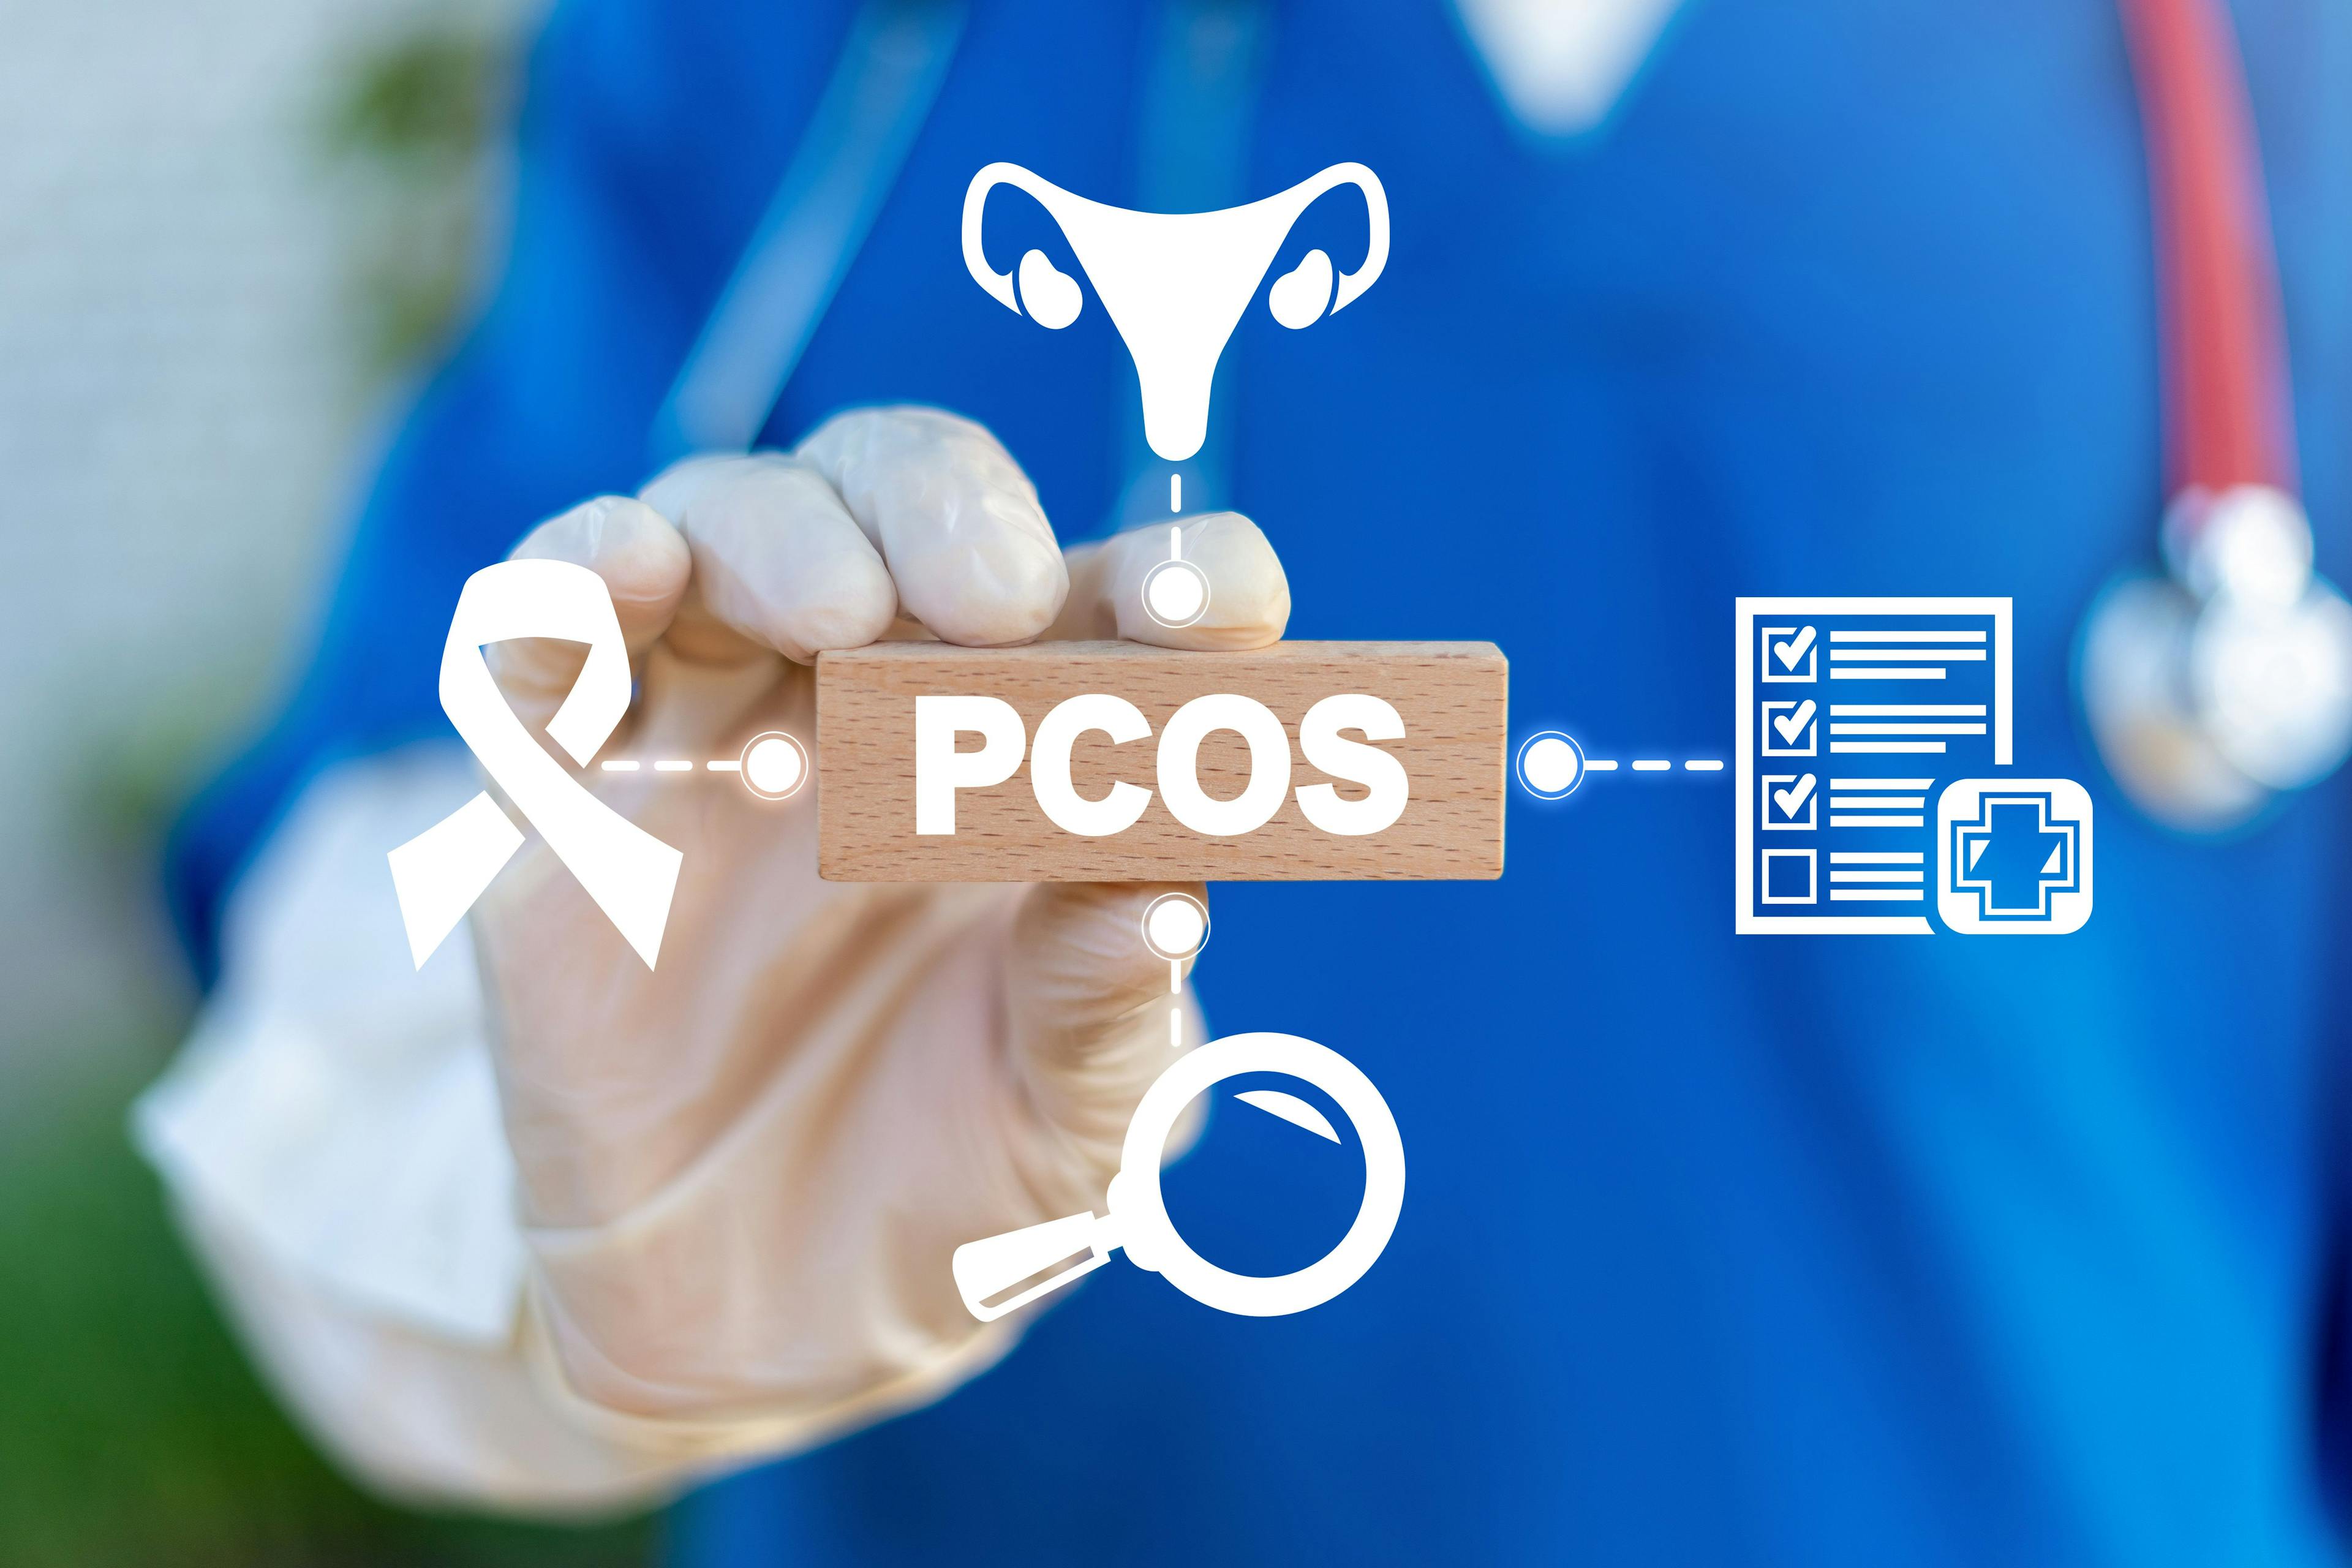 Prevalence of PCOS with pediatric diabetes